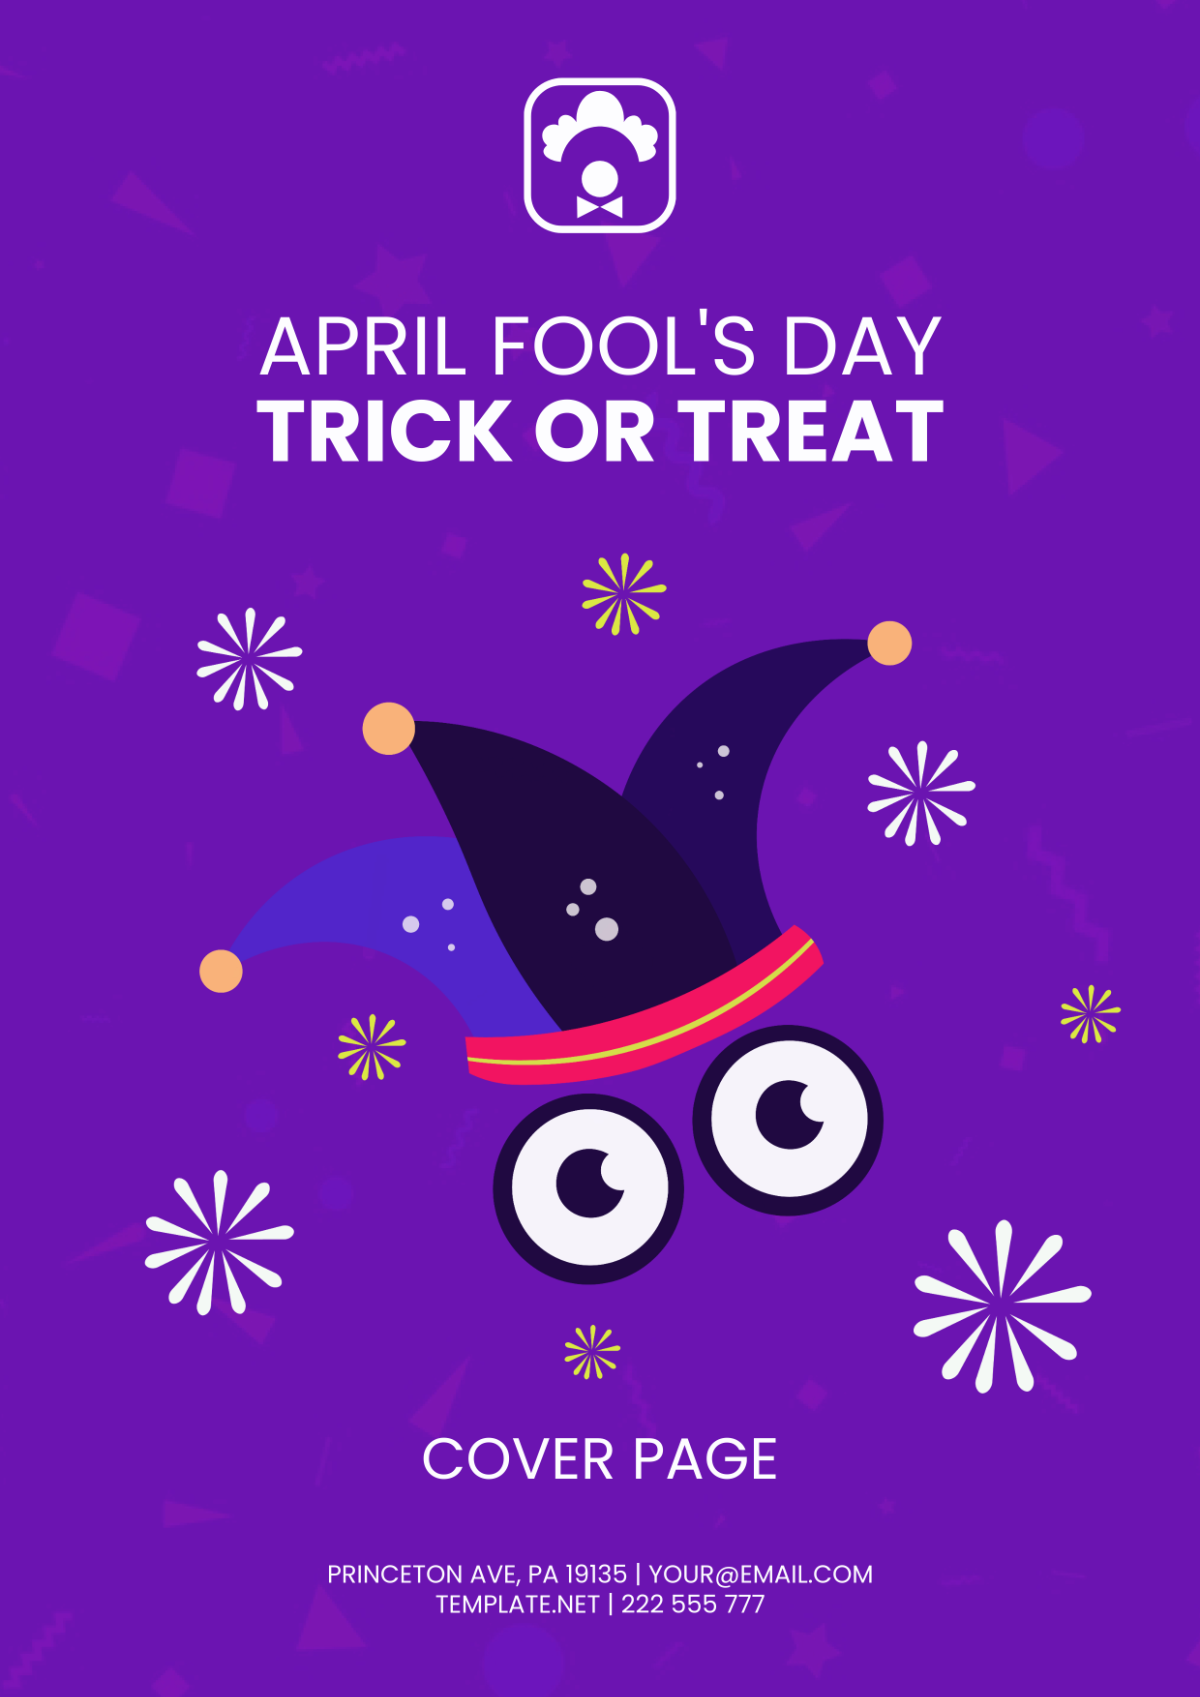 April Fool's Day Trick or Treat Cover Page Template